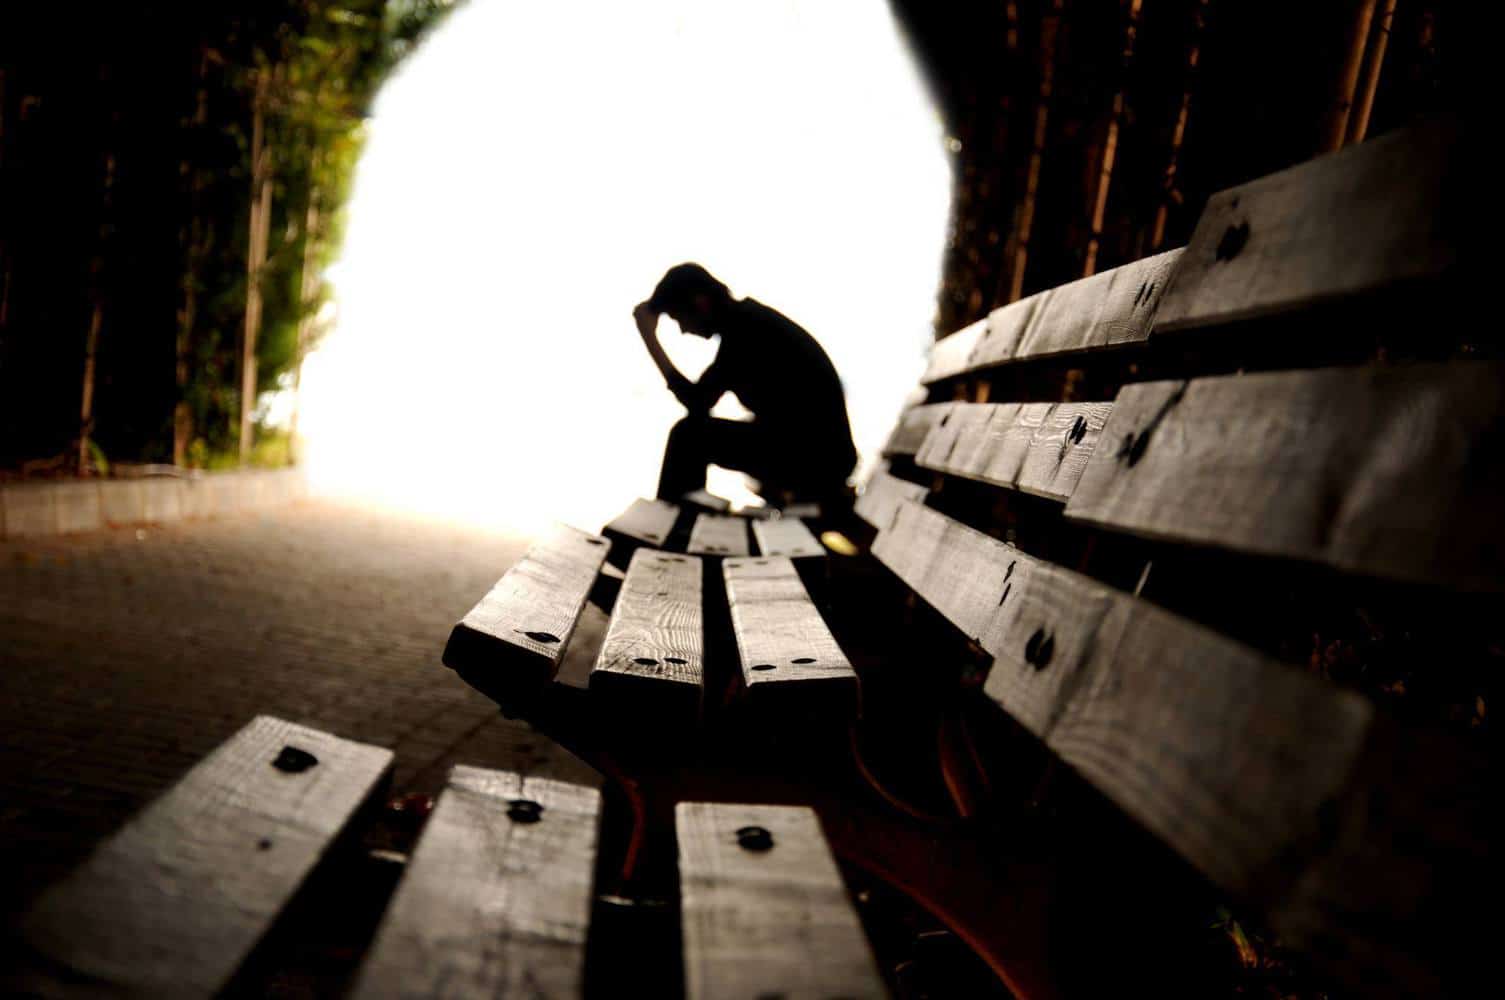 A depressed person sitting at a bench.